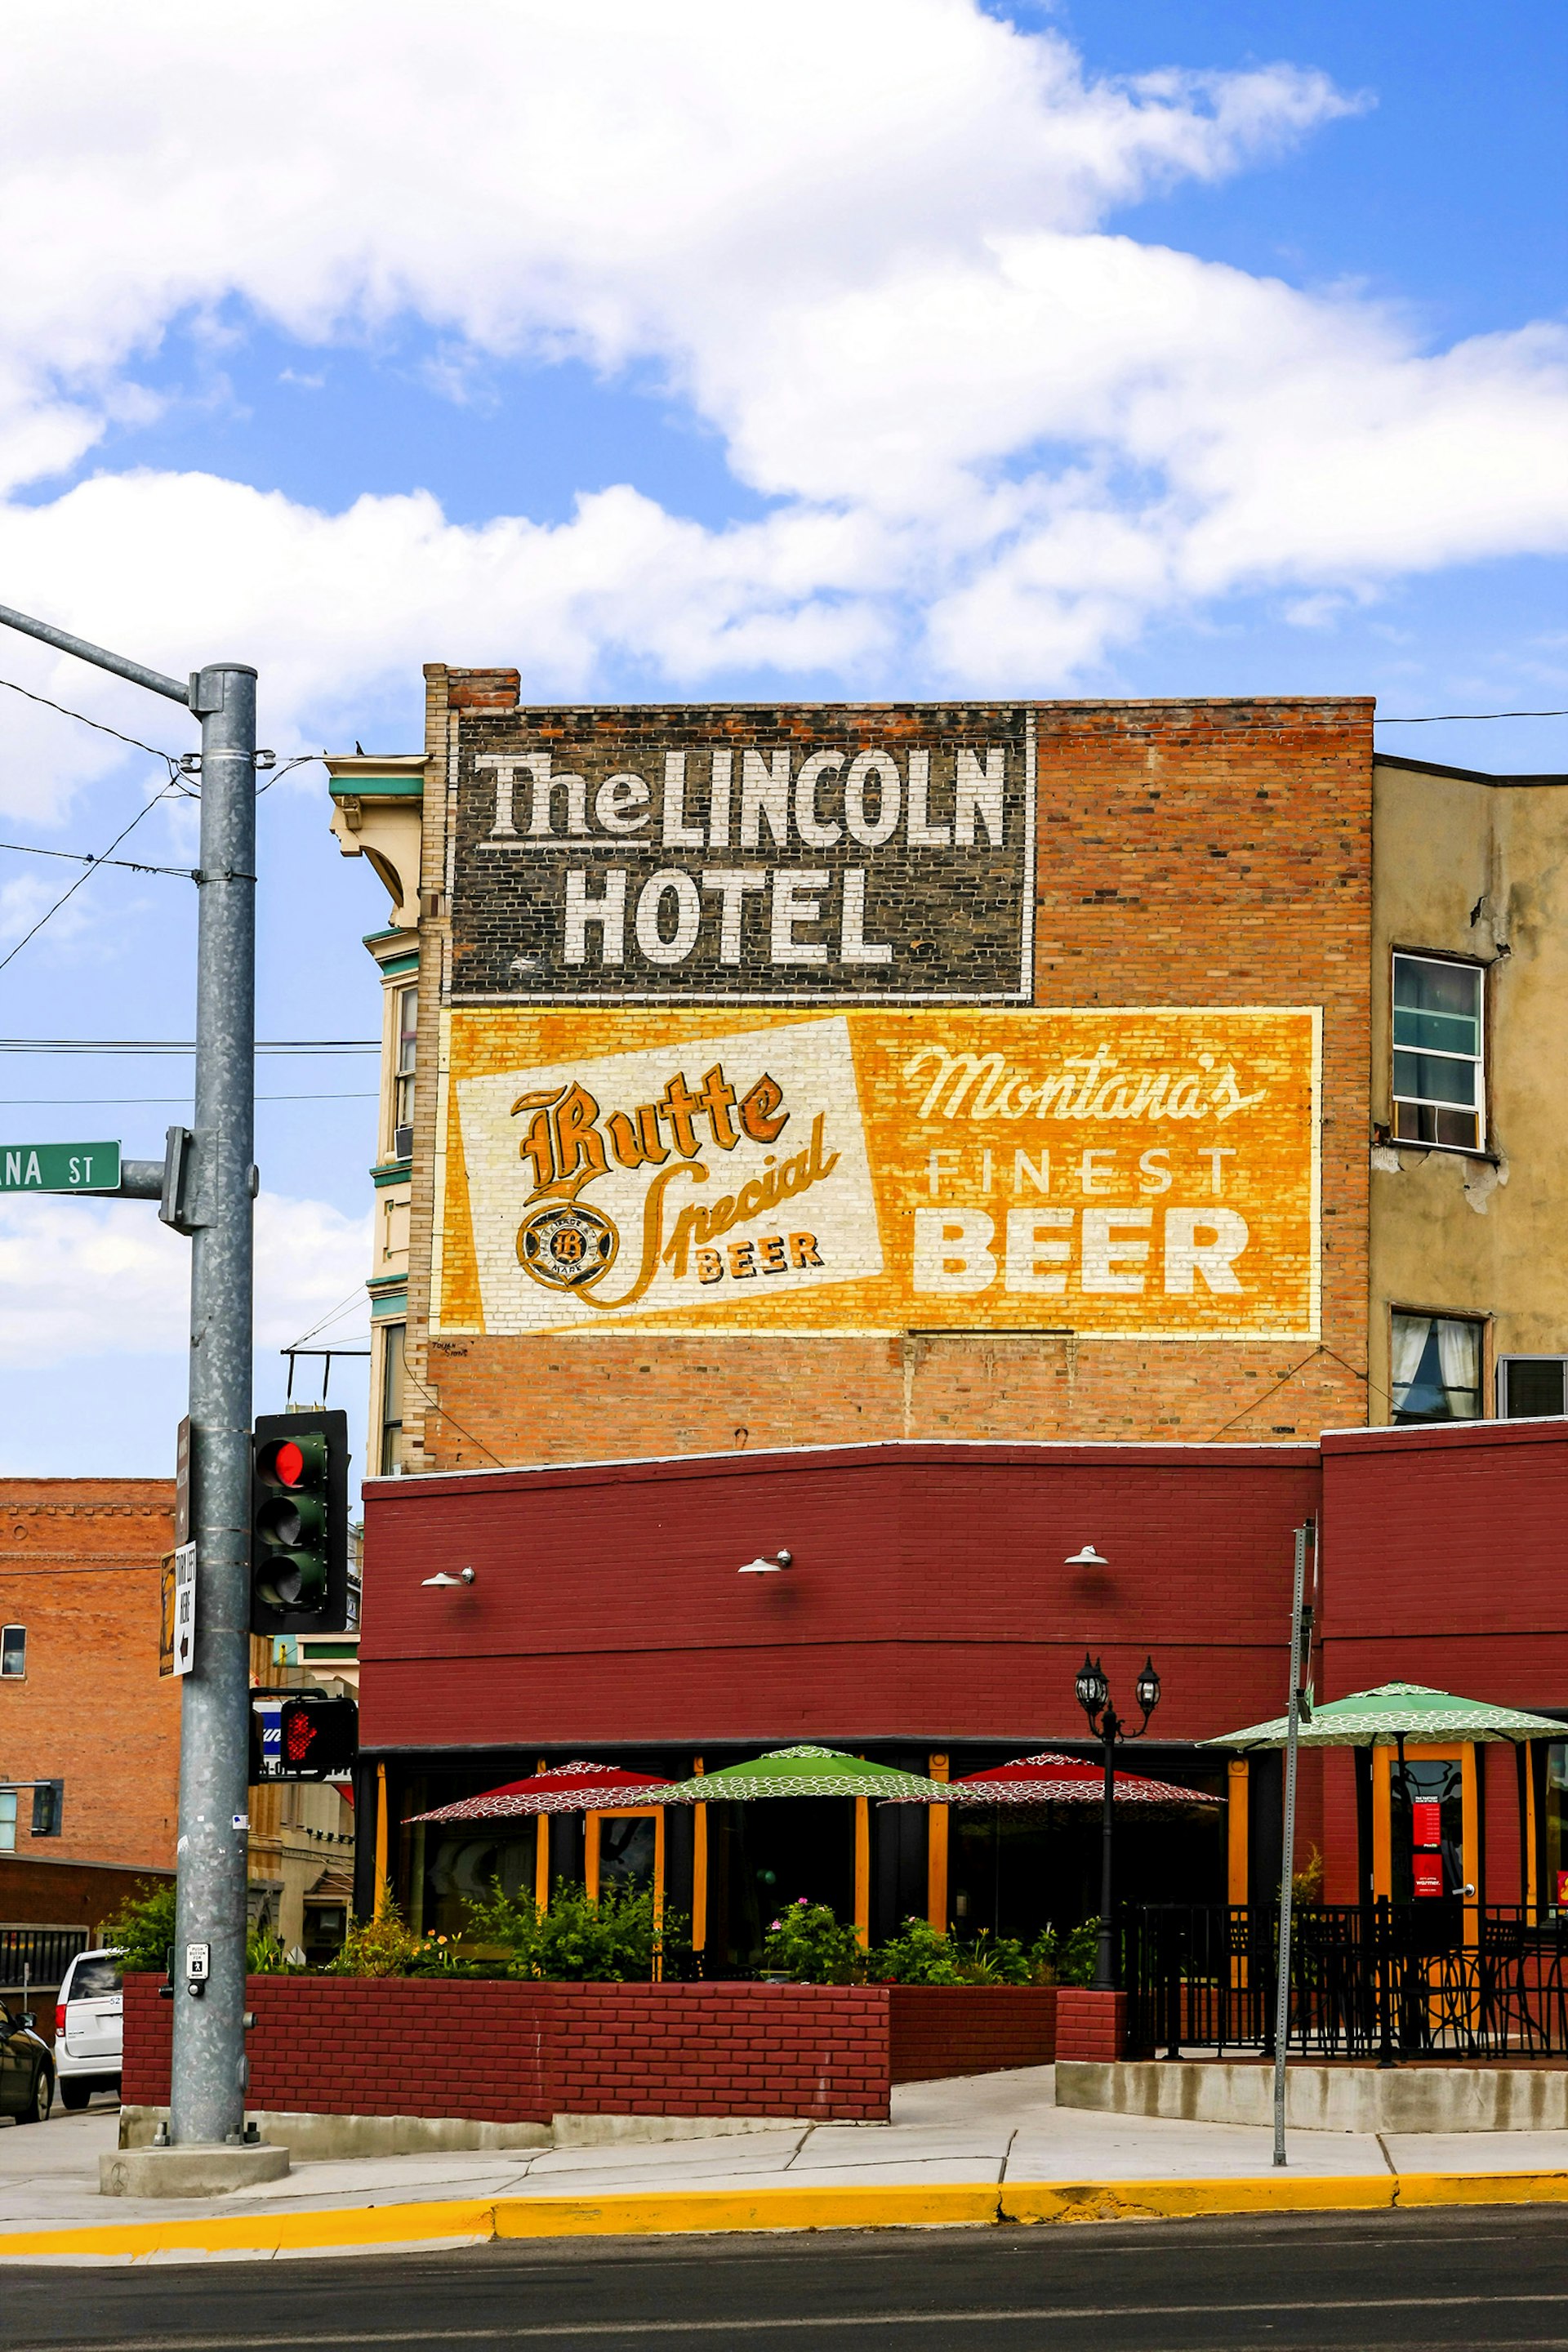 Features - The Lincoln Hotel and Butte Bear painted advert